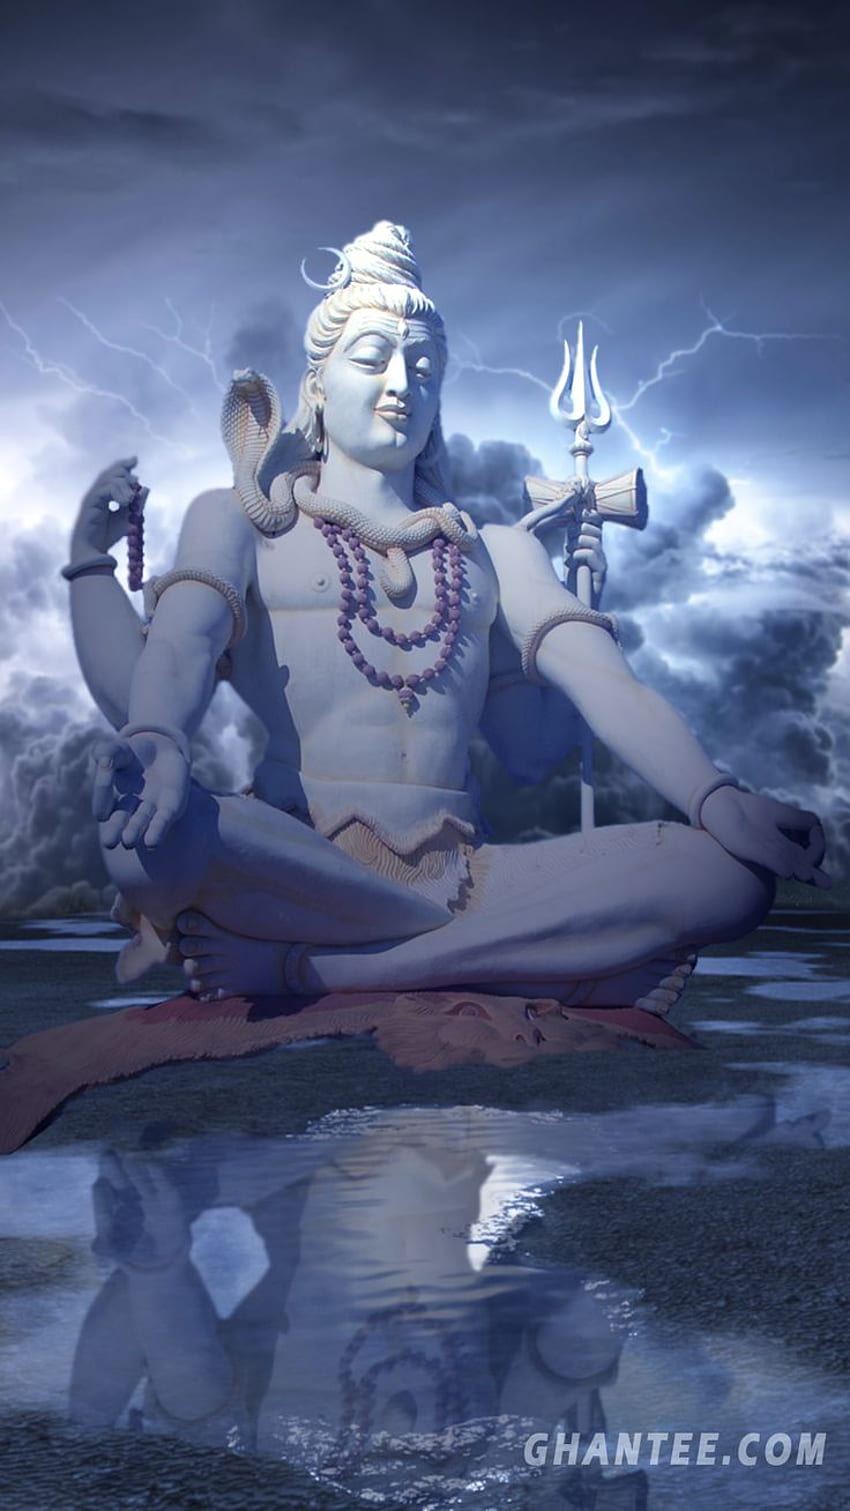 Shiv for iphone and android. Shiva lord , iphone, Lord shiva, Shiv ...